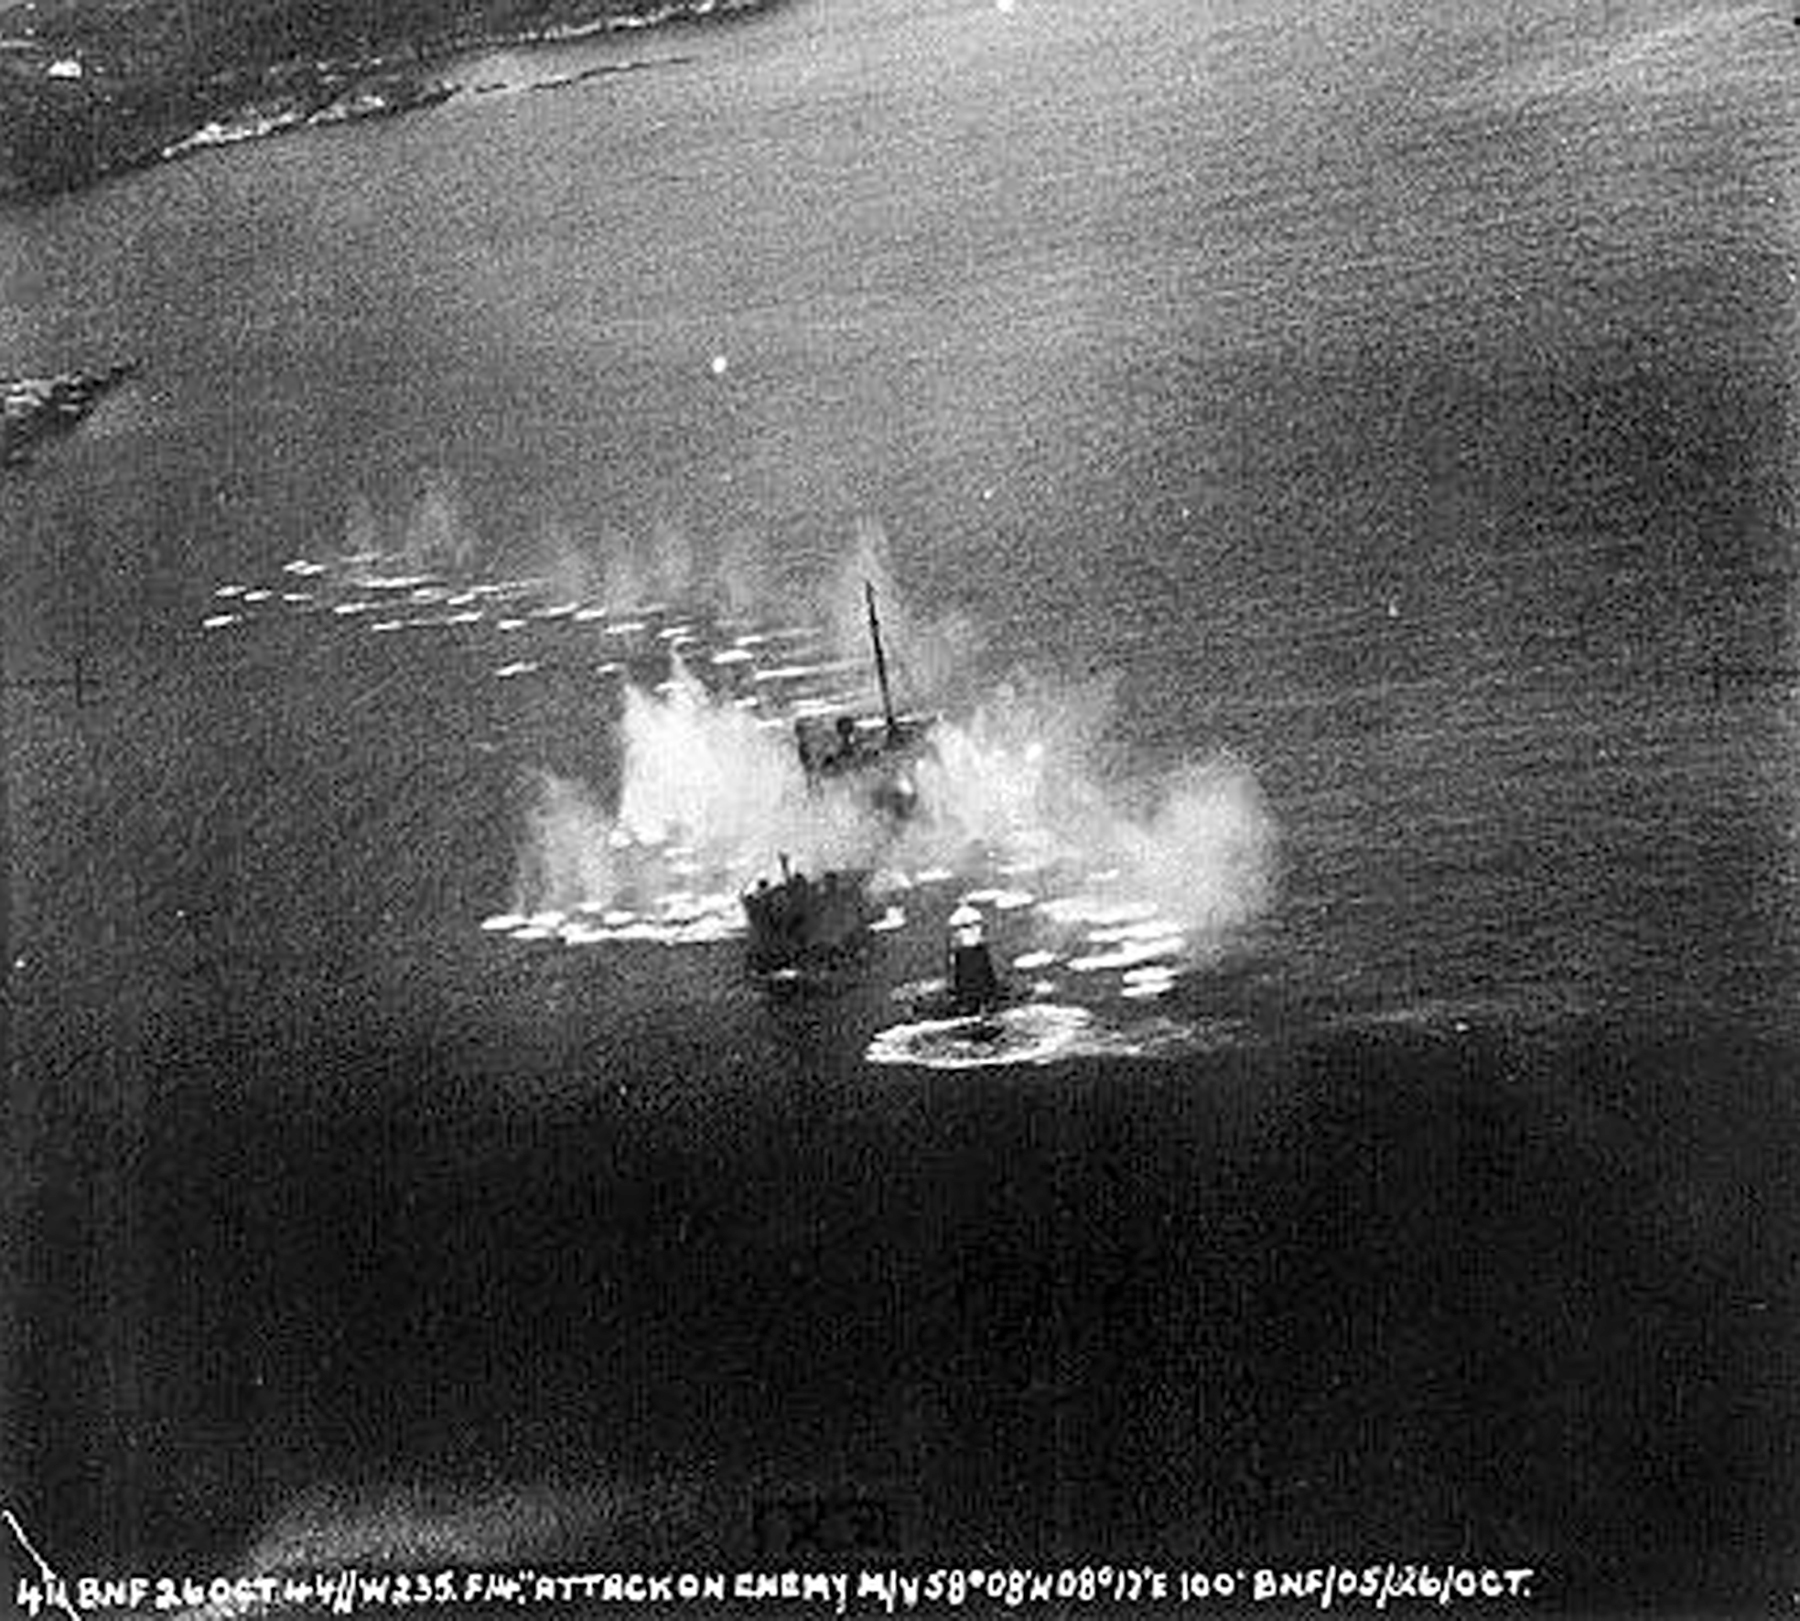 Attack on German Shipping in the Fjords by RAF Banff Mosquito 03